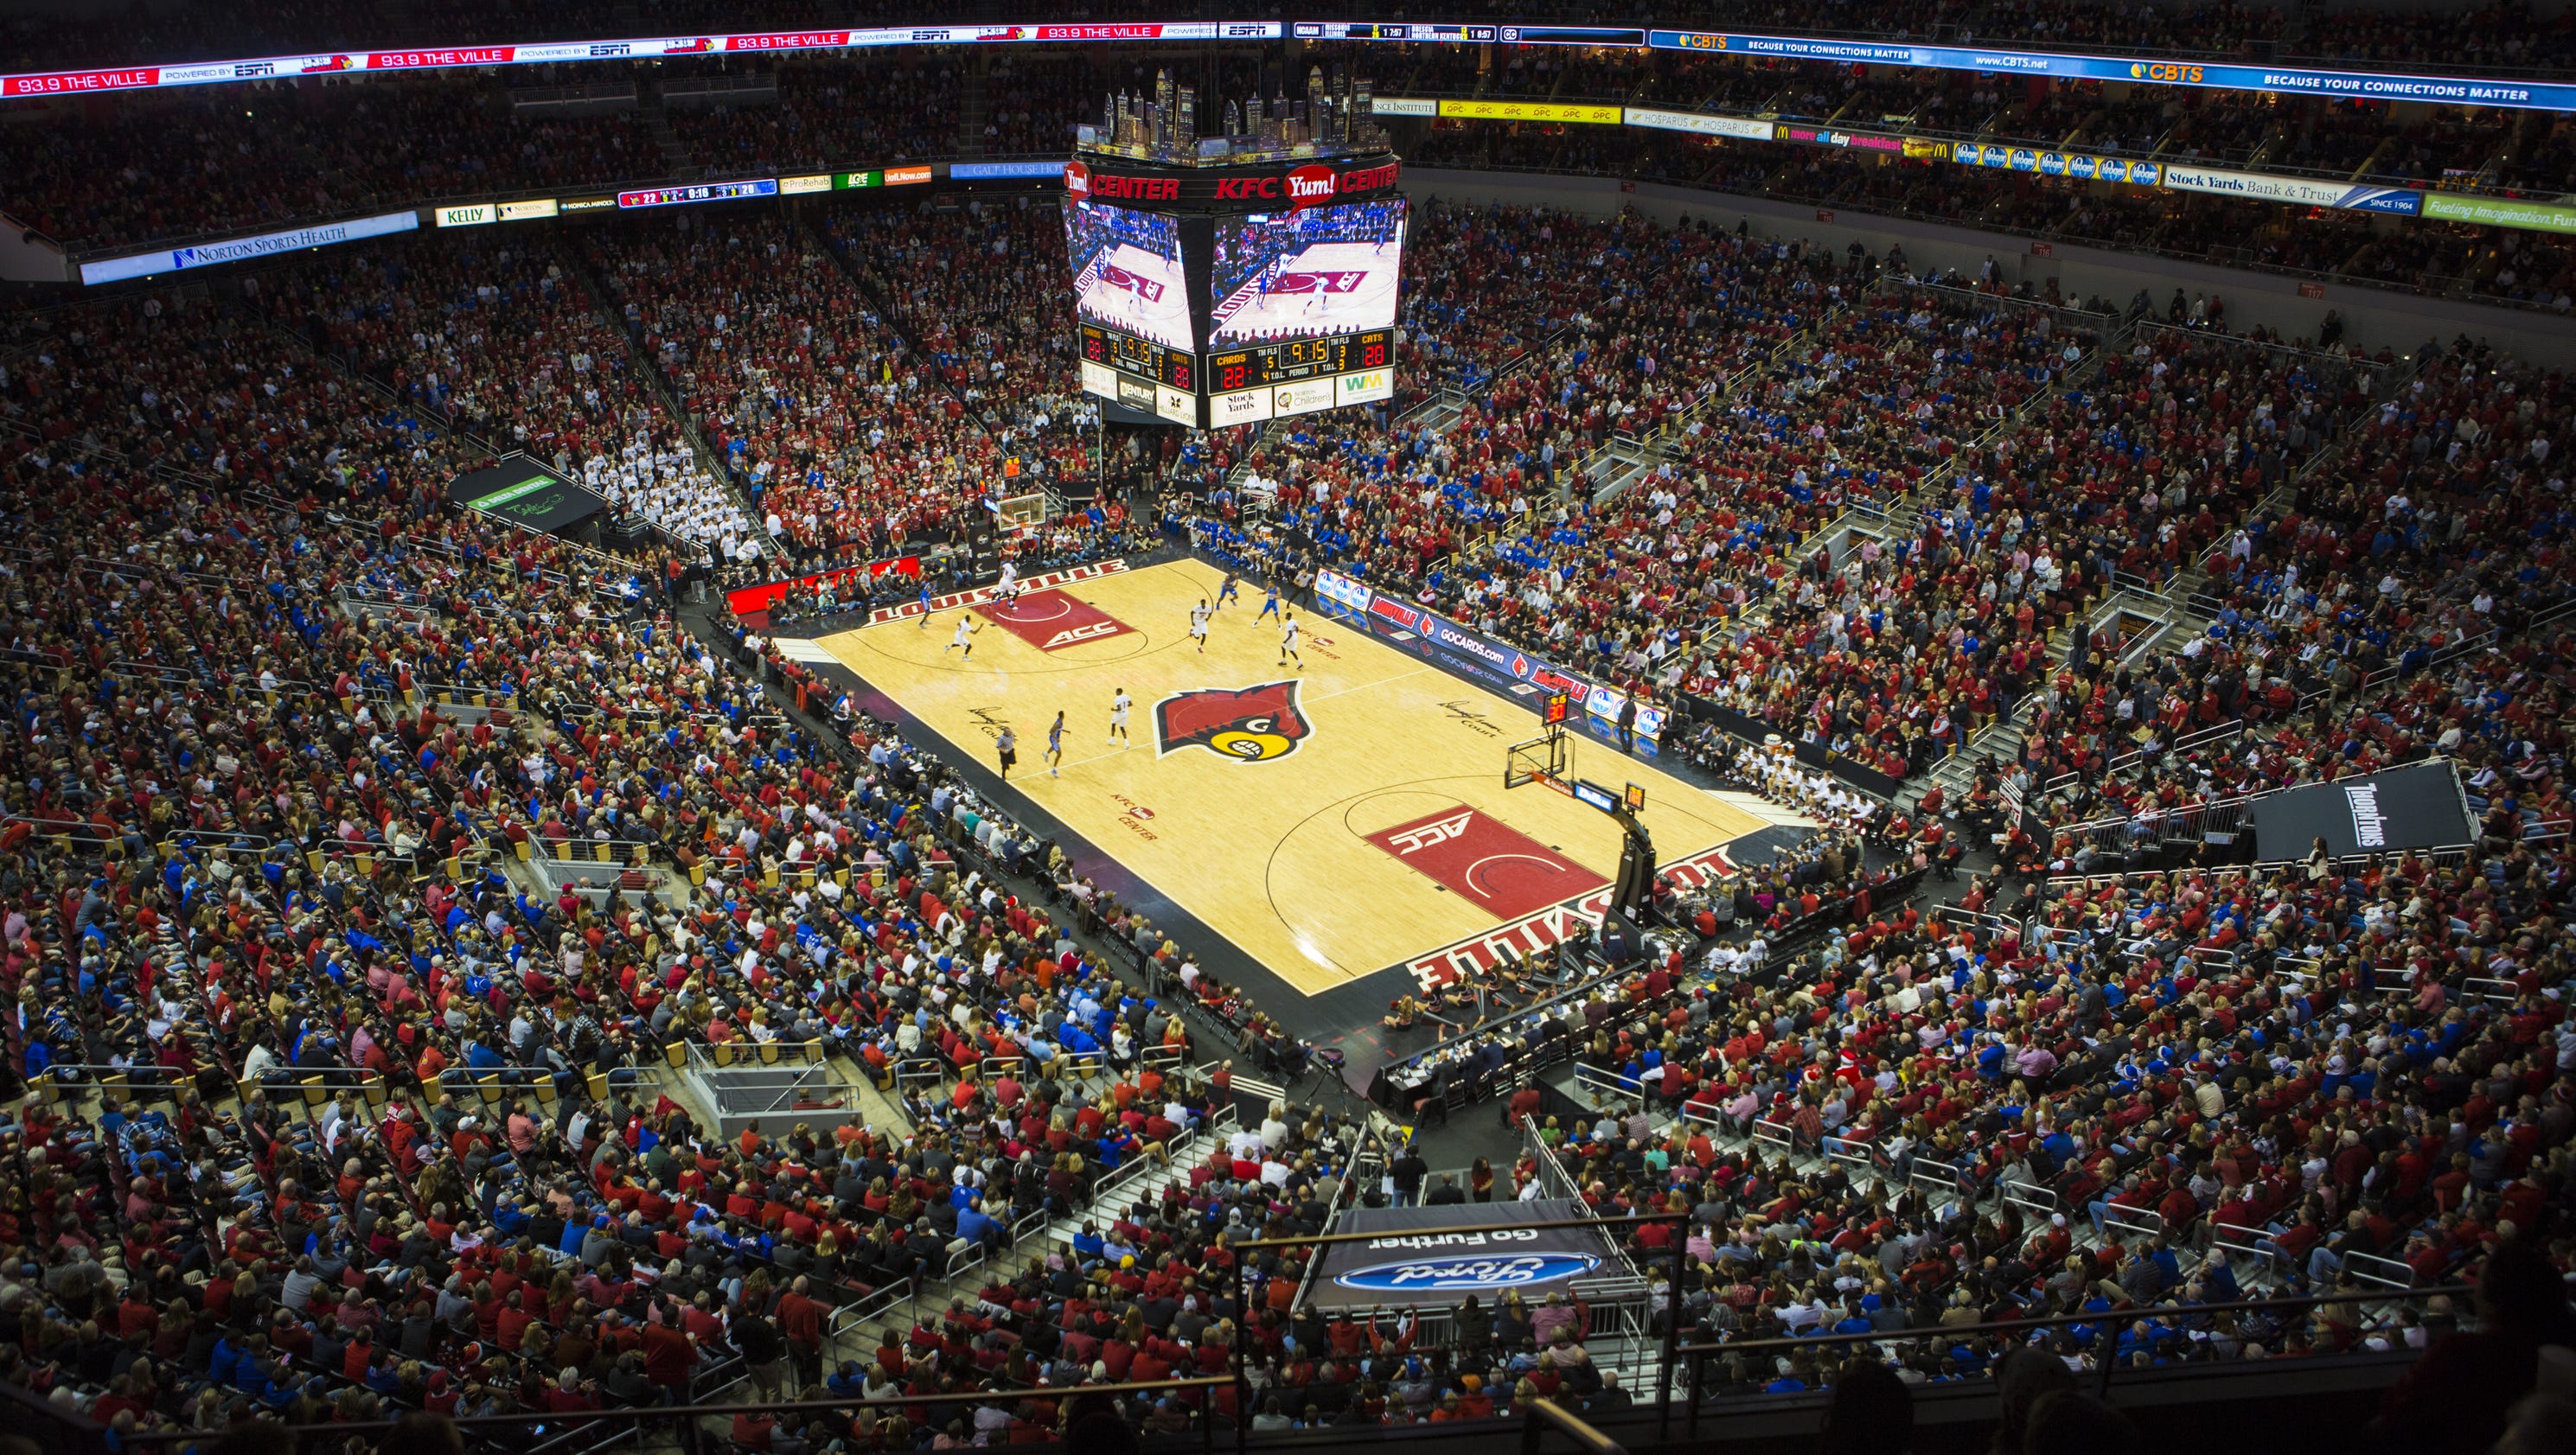 No payout for UofL student who made half-court shot